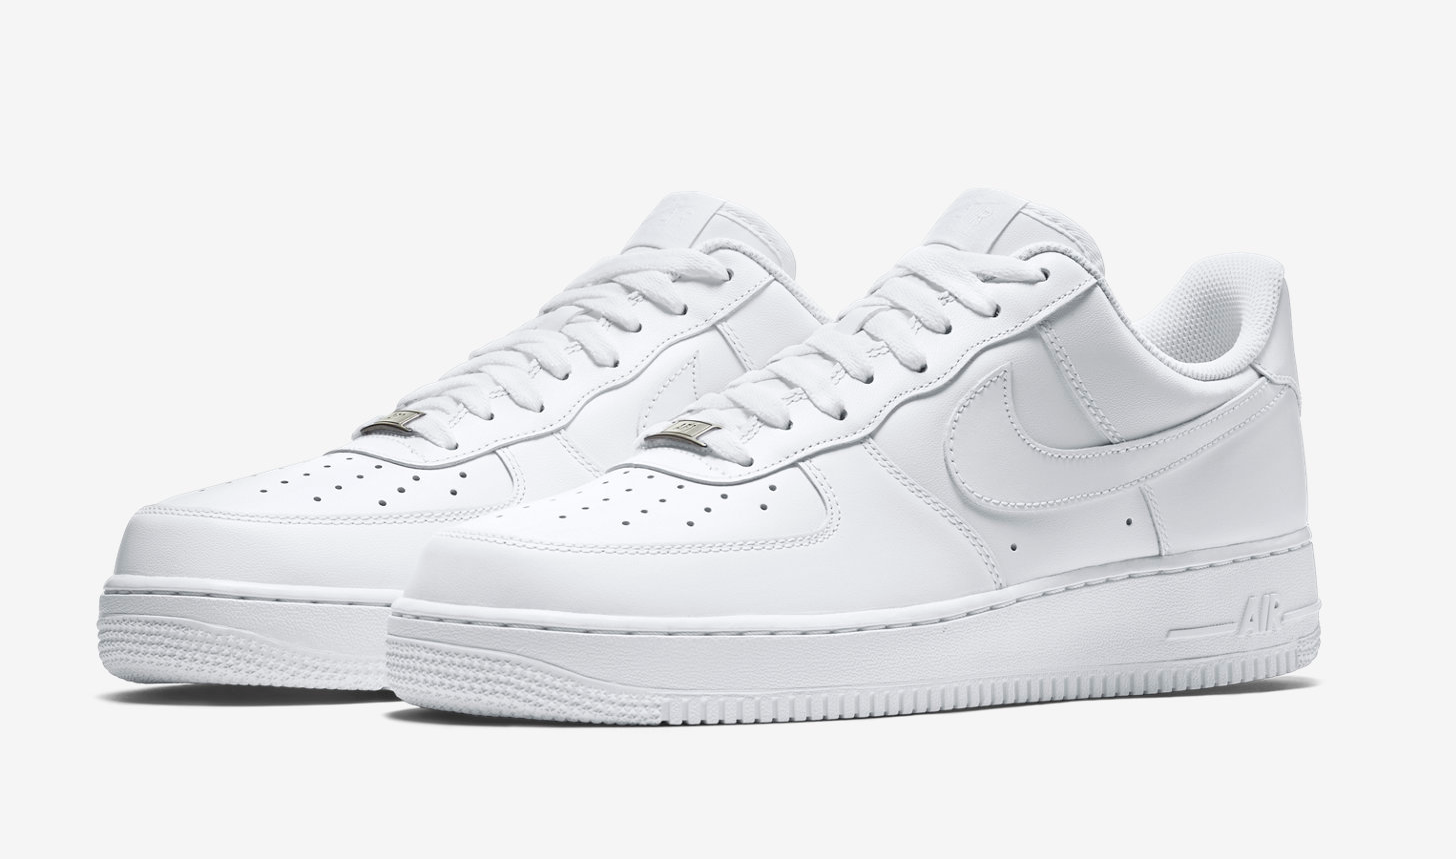 The Nike Air Force 1 Wild Calls Back To Archival Nike Models